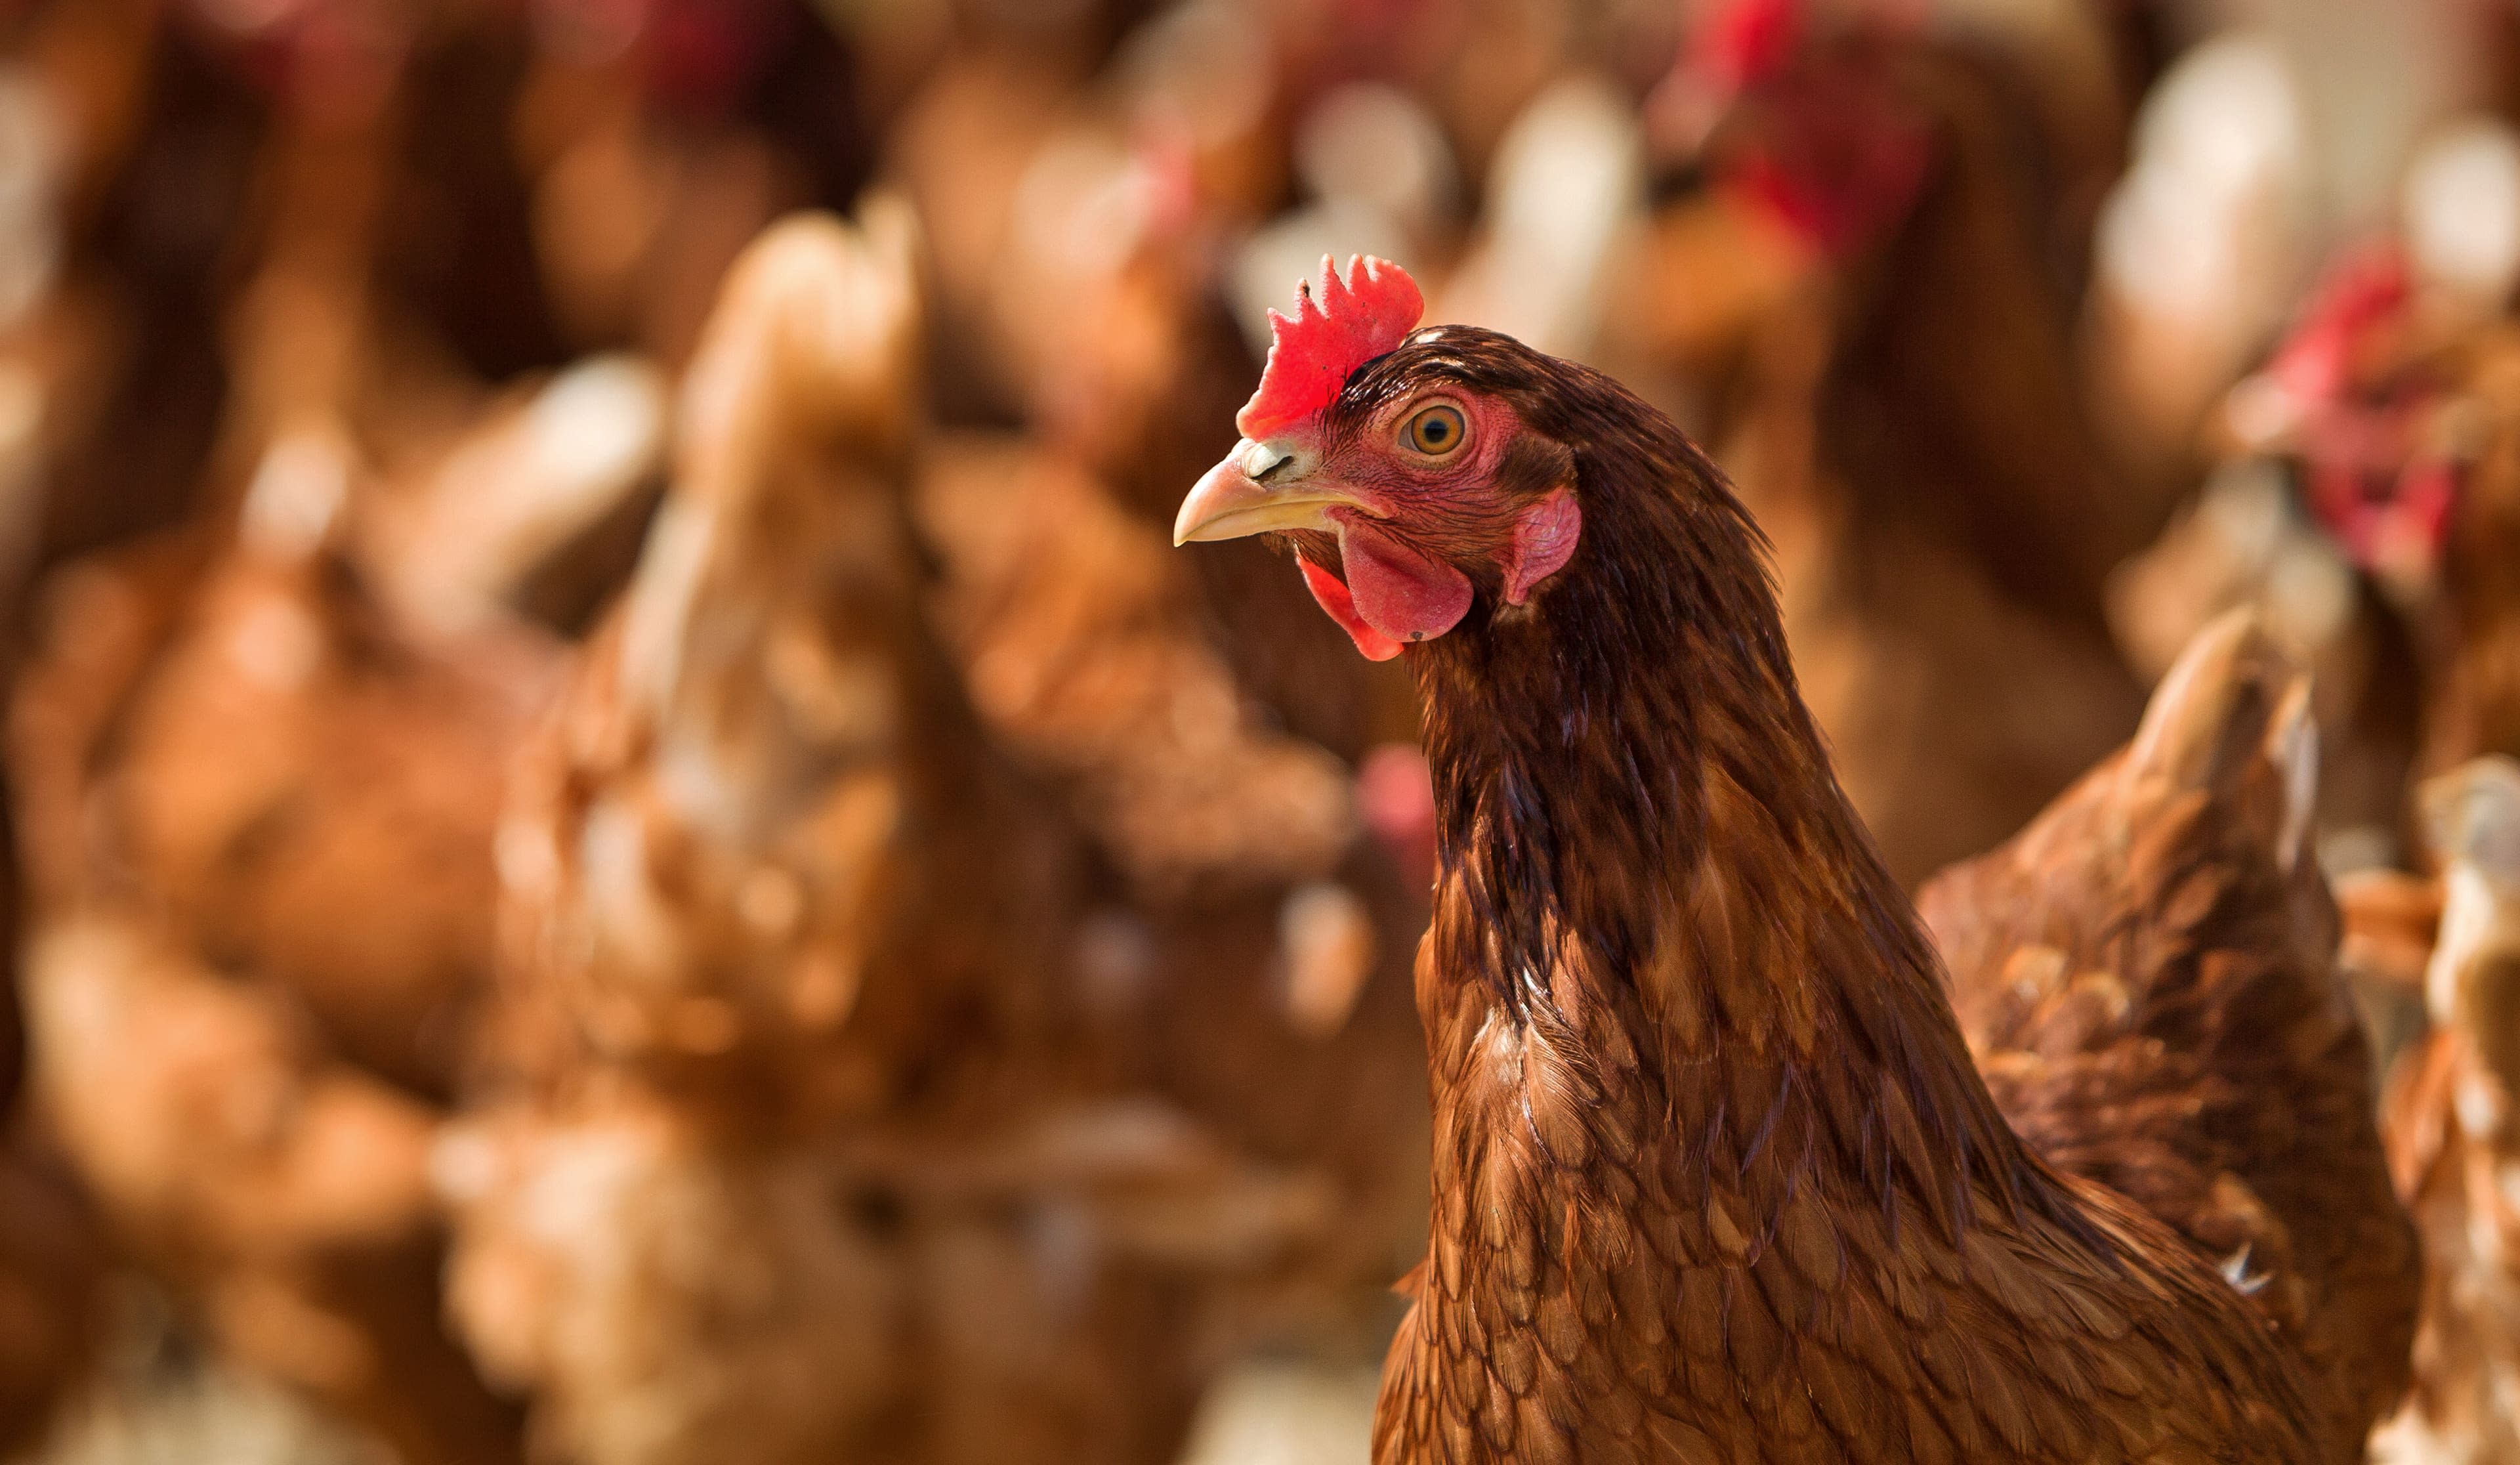 KFC, Pizza Hut, and Taco Bell state Global Cage-Free Policy.